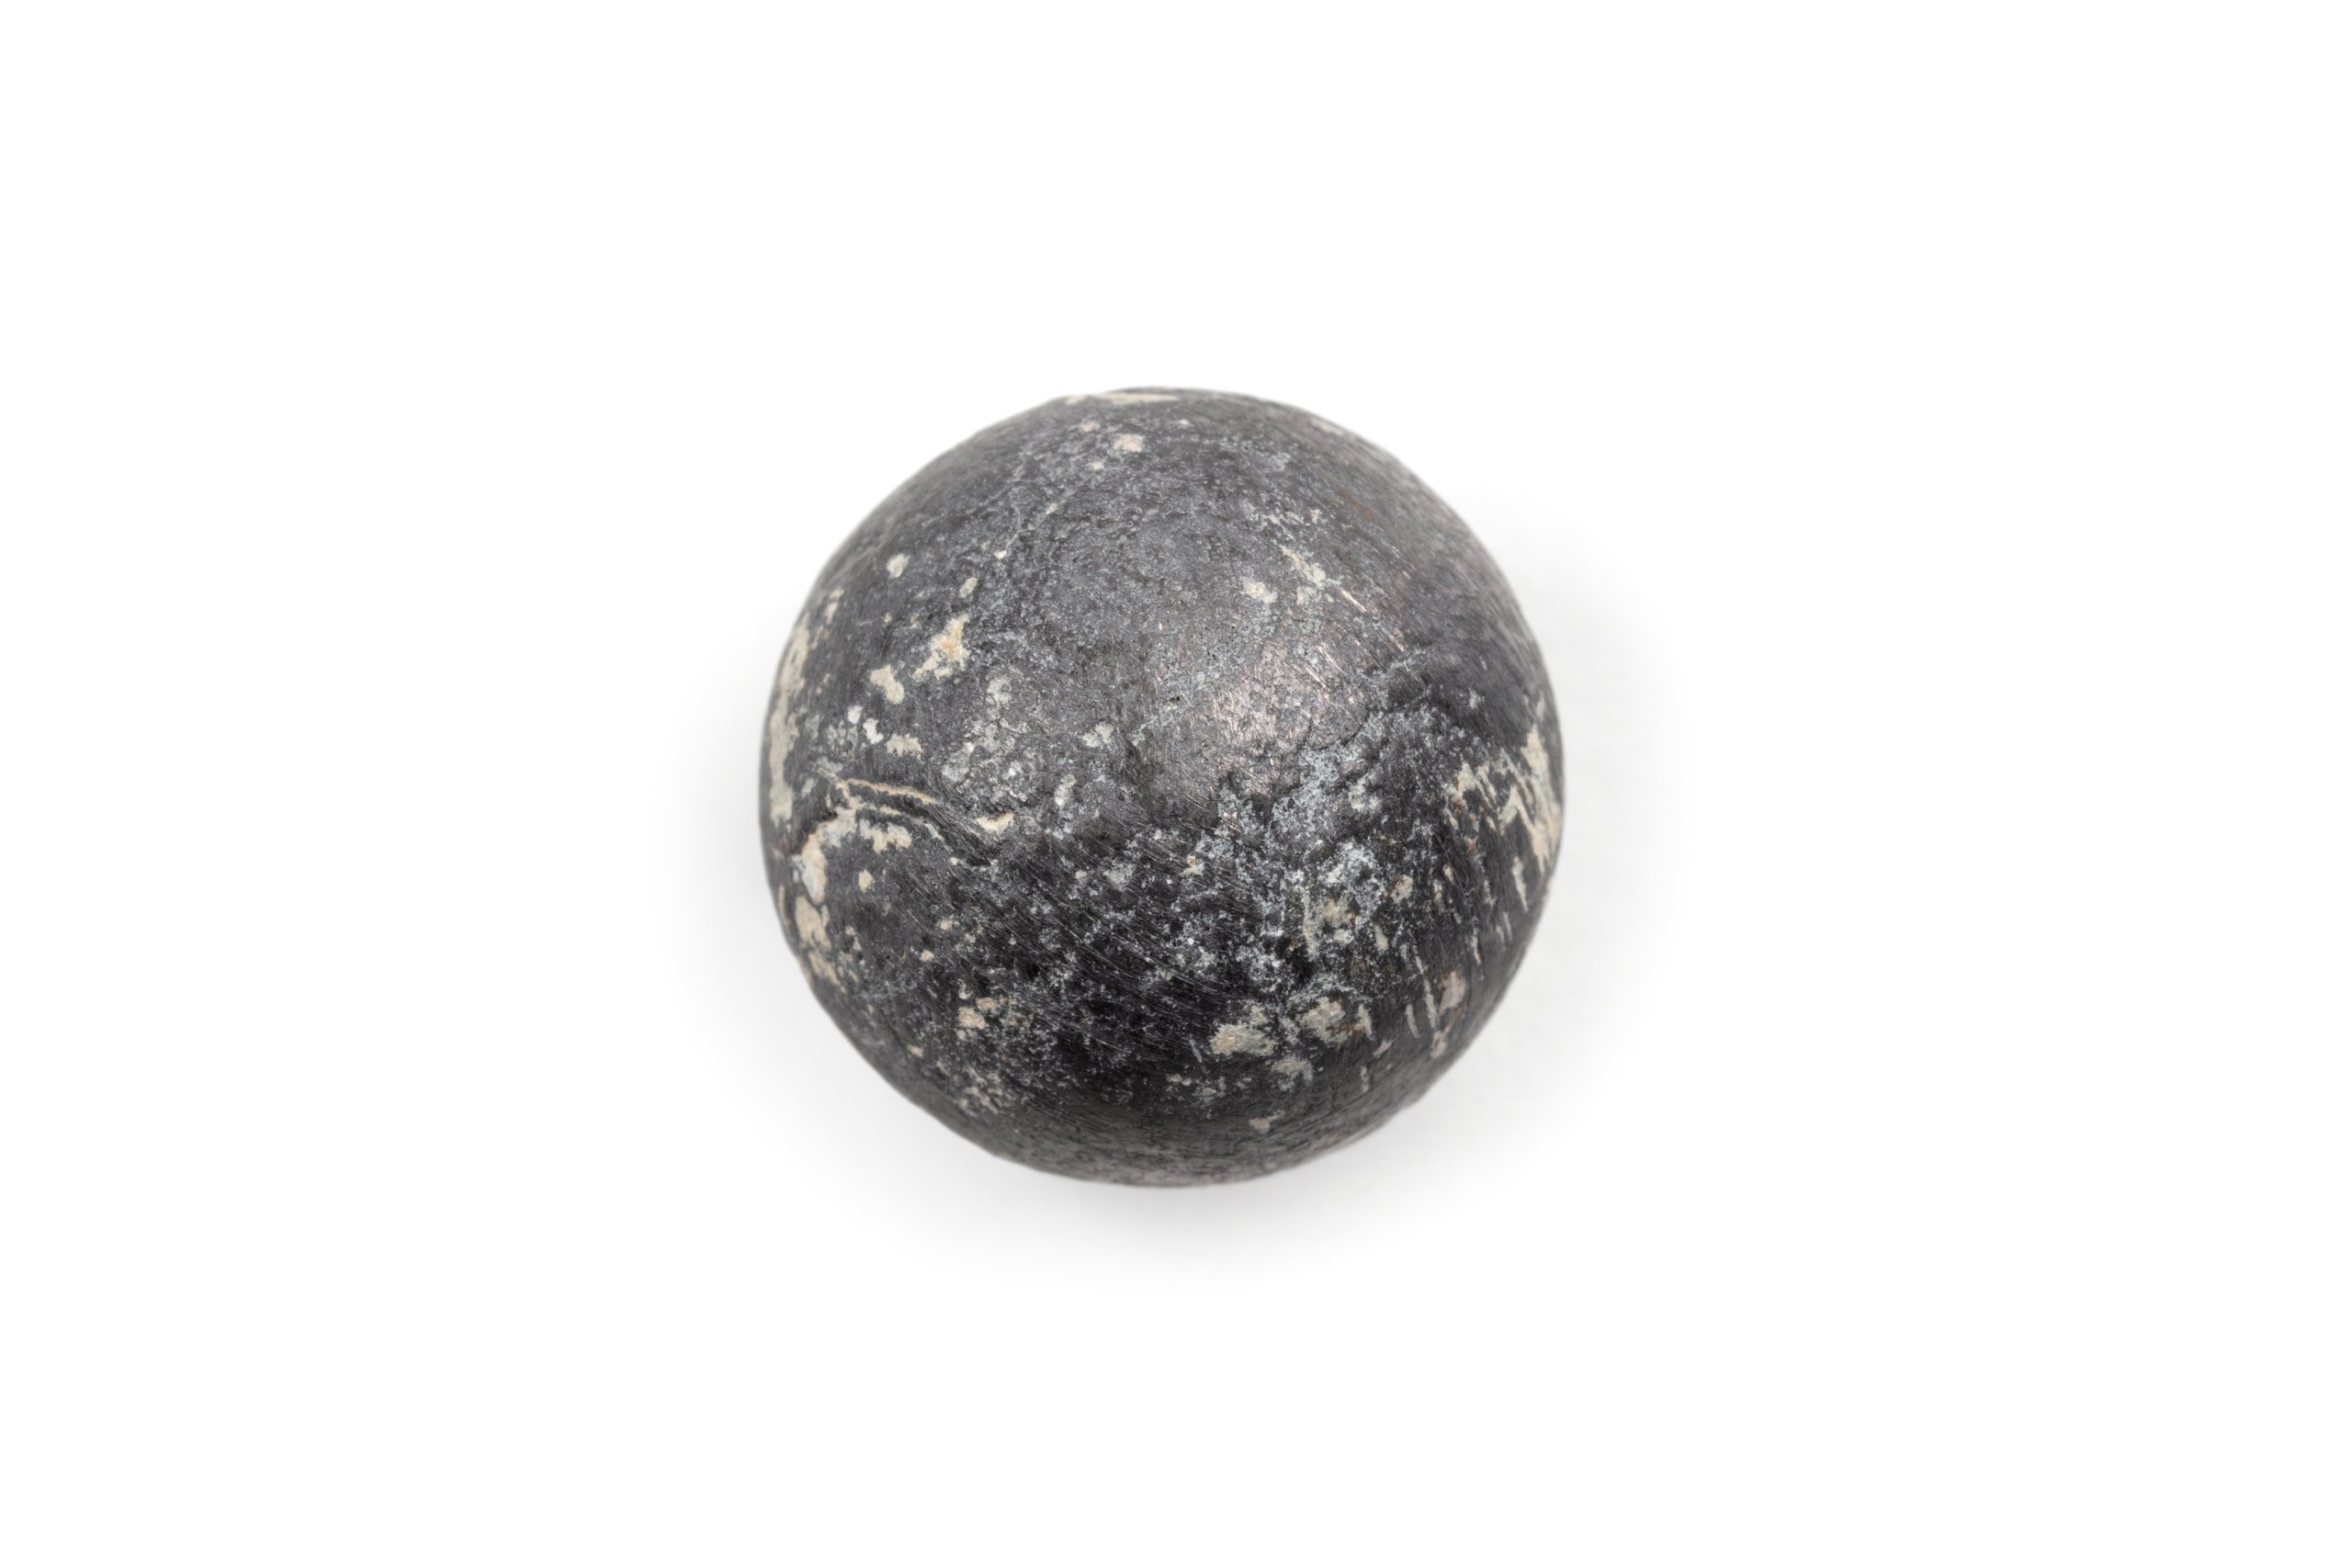 Spherical lead ball from a Potts & Hunt double barrelled carbine